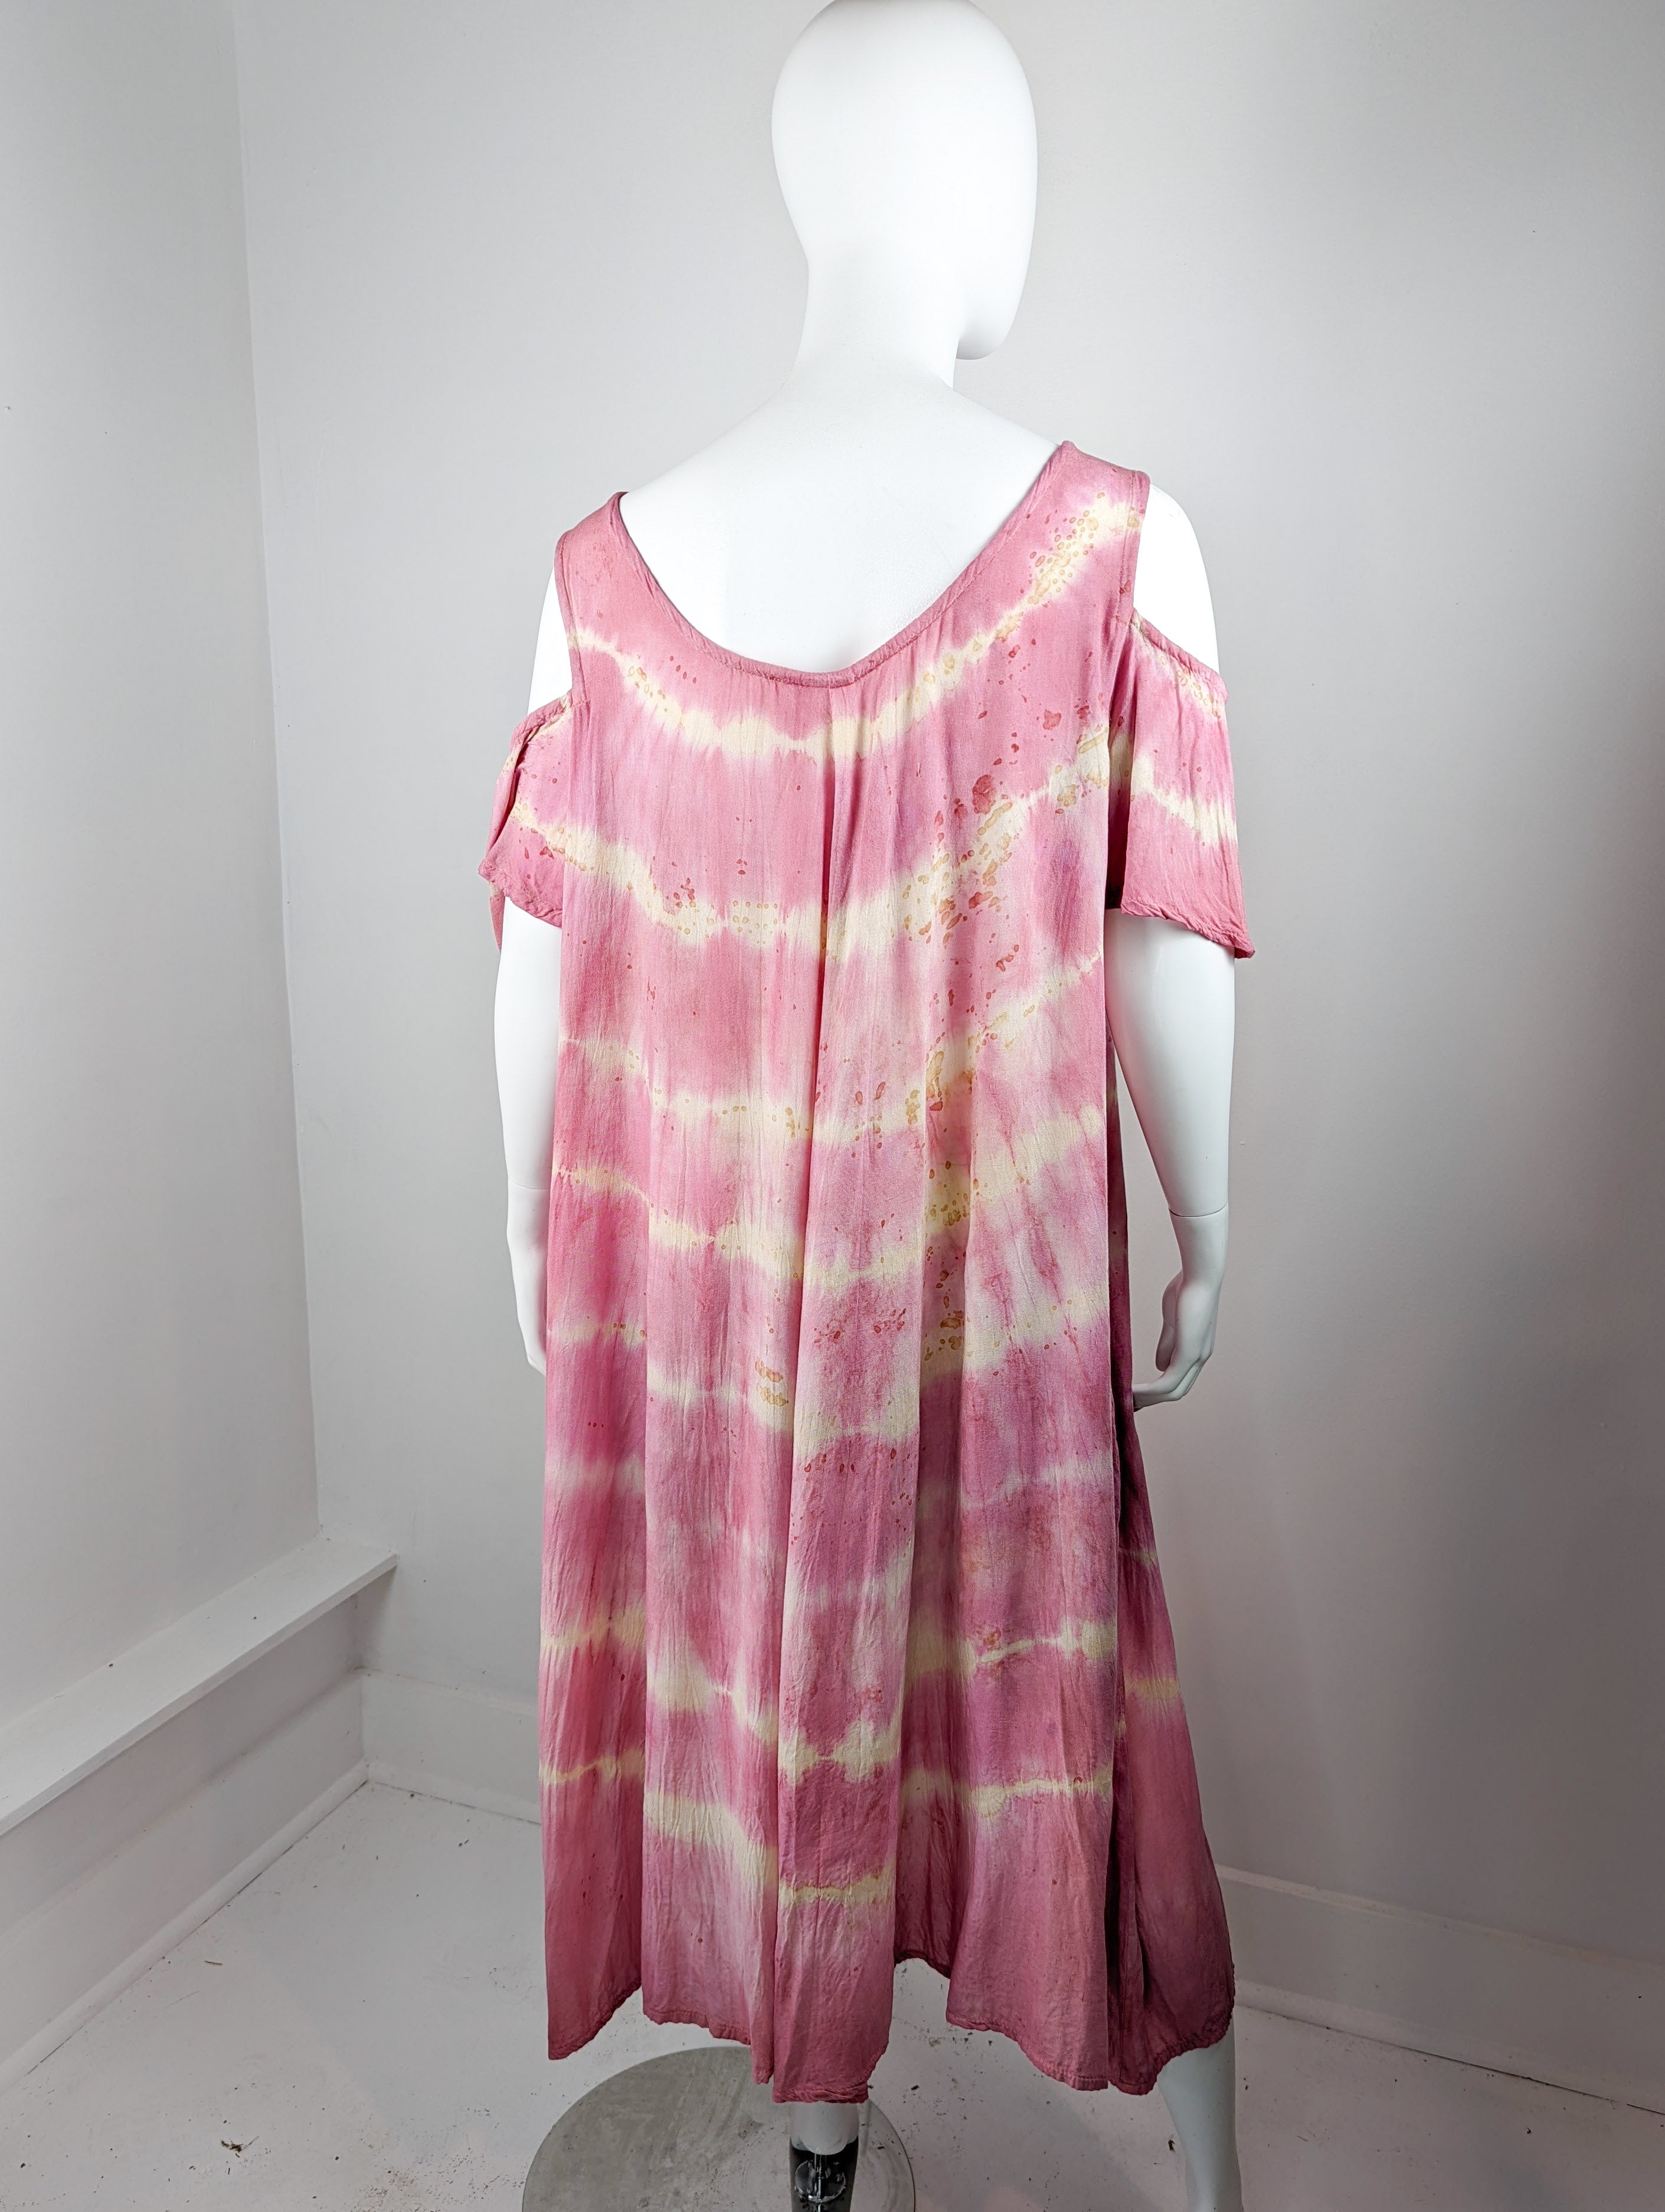 Sappanwood Shibori Orchid Cold Shoulder Day Dream Dress with Pockets - 2XL - The Caffeinated Raven